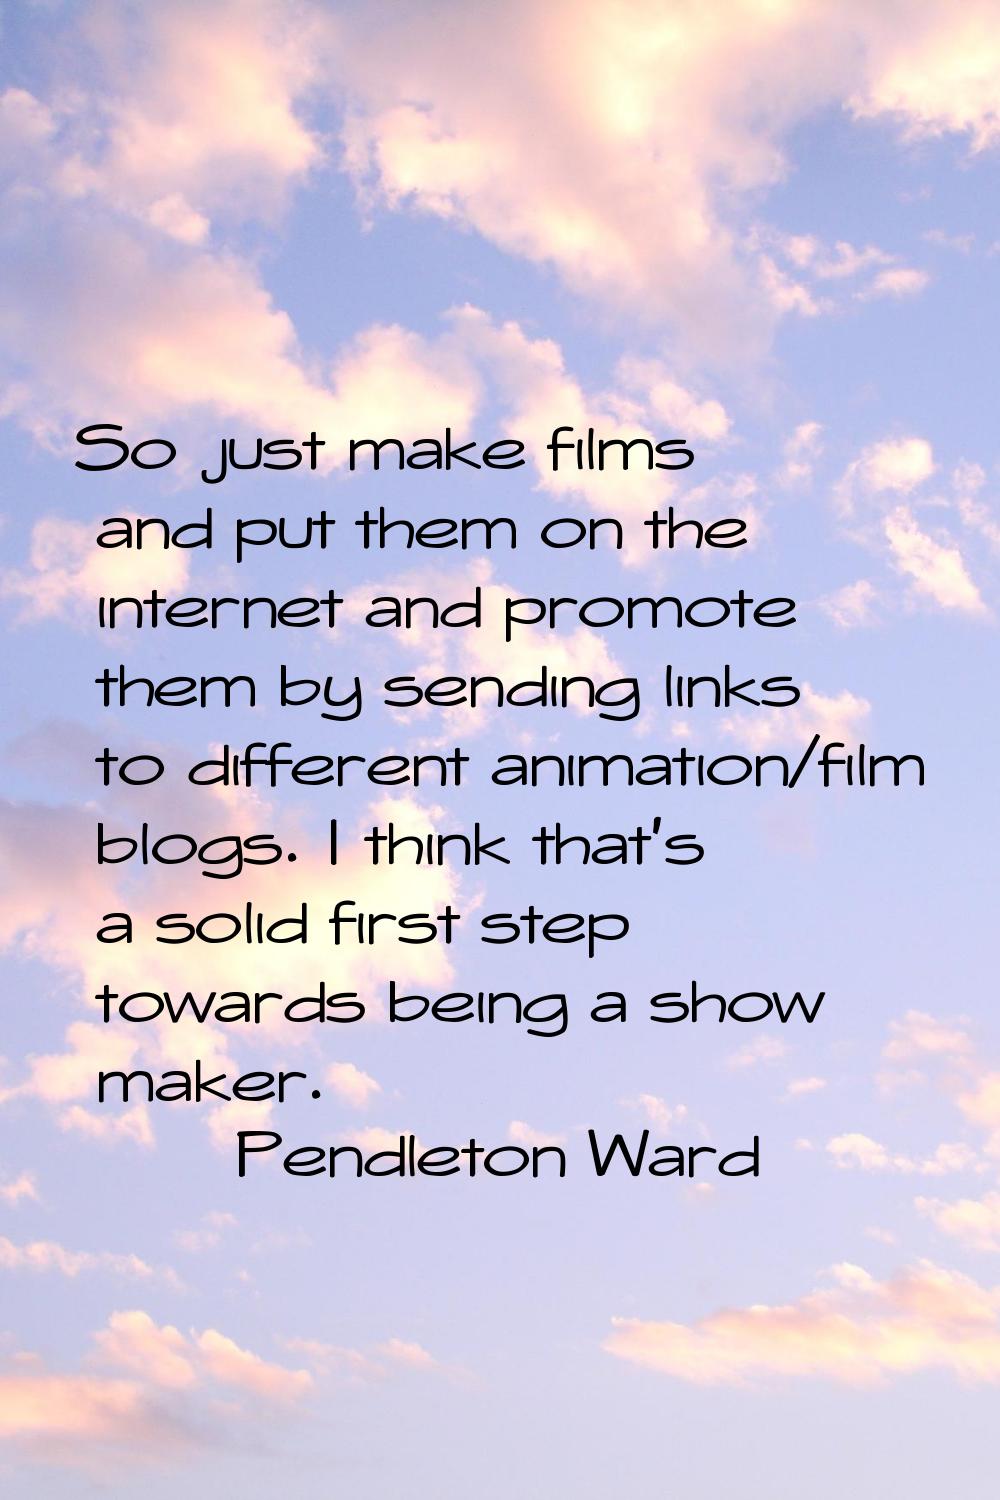 So just make films and put them on the internet and promote them by sending links to different anim